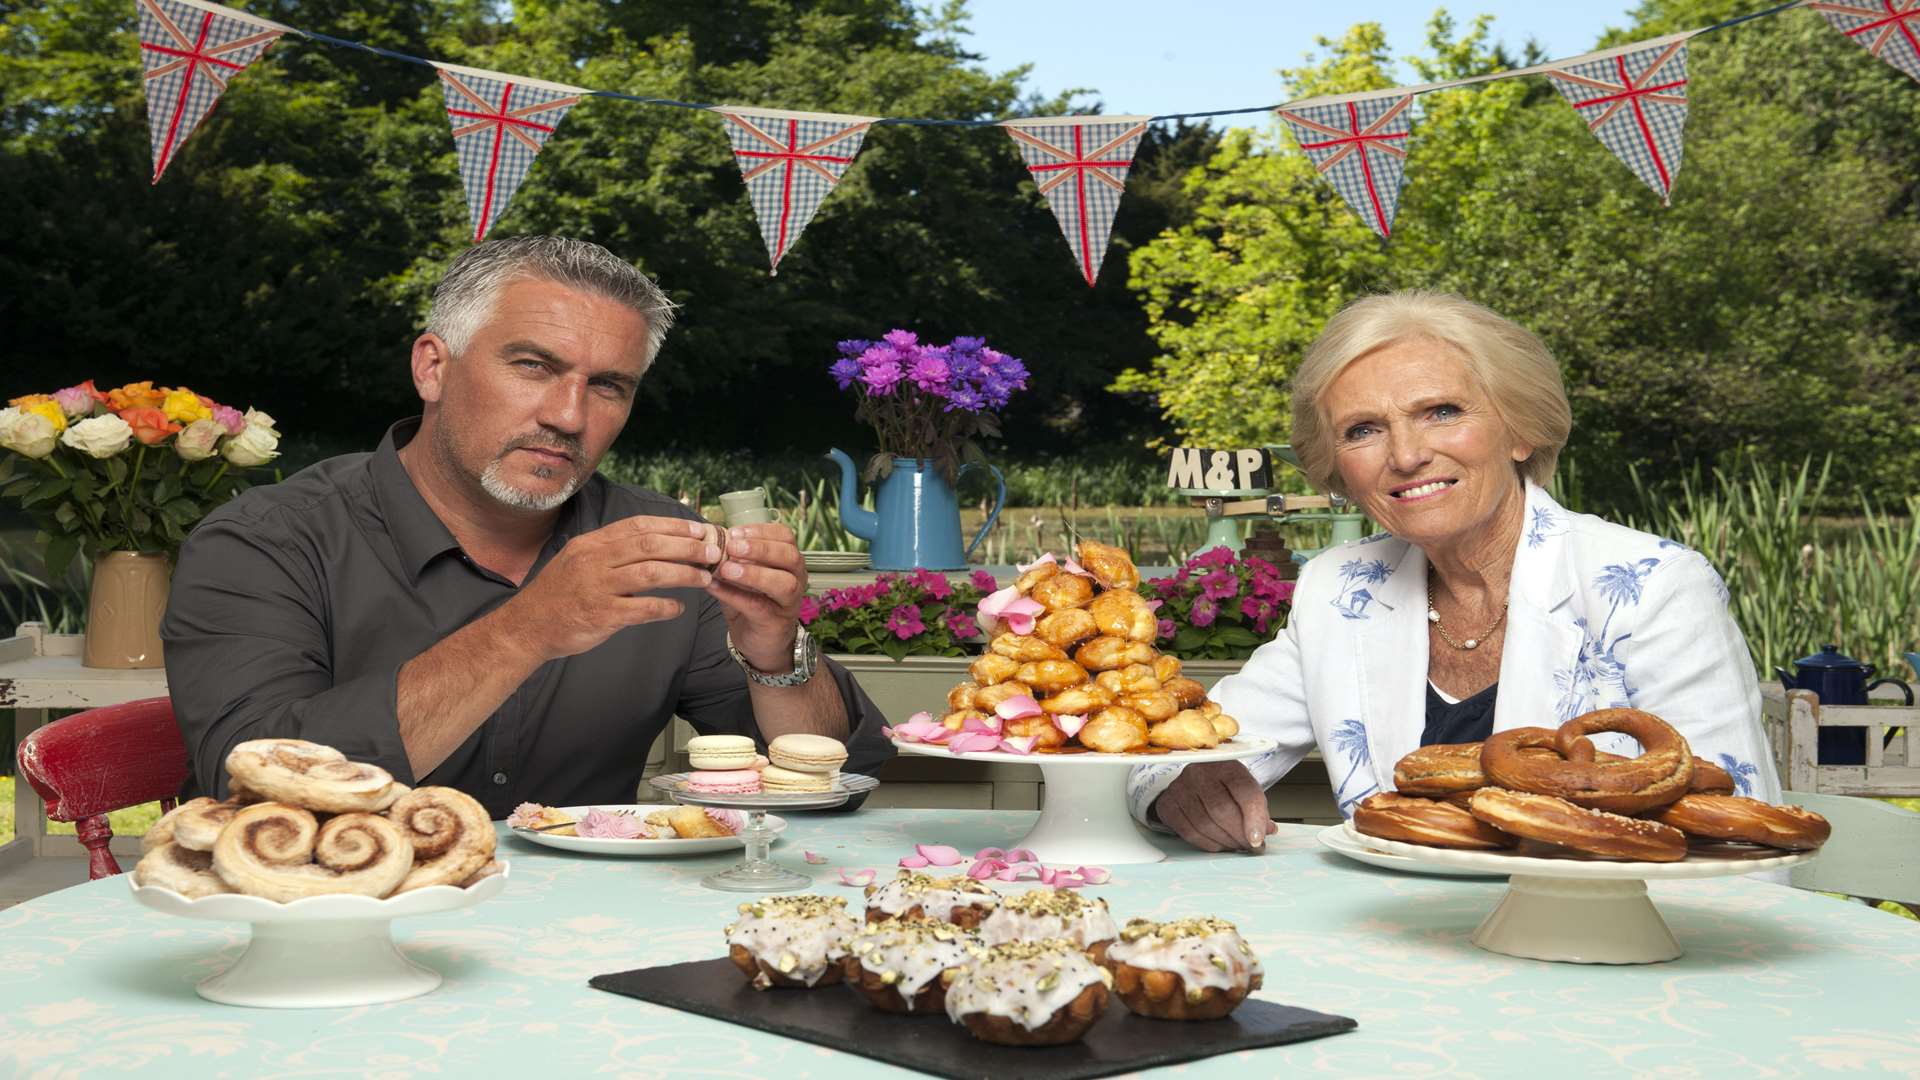 Great British Bake Off judge Paul Hollywood with Mary Berry, who has left the show